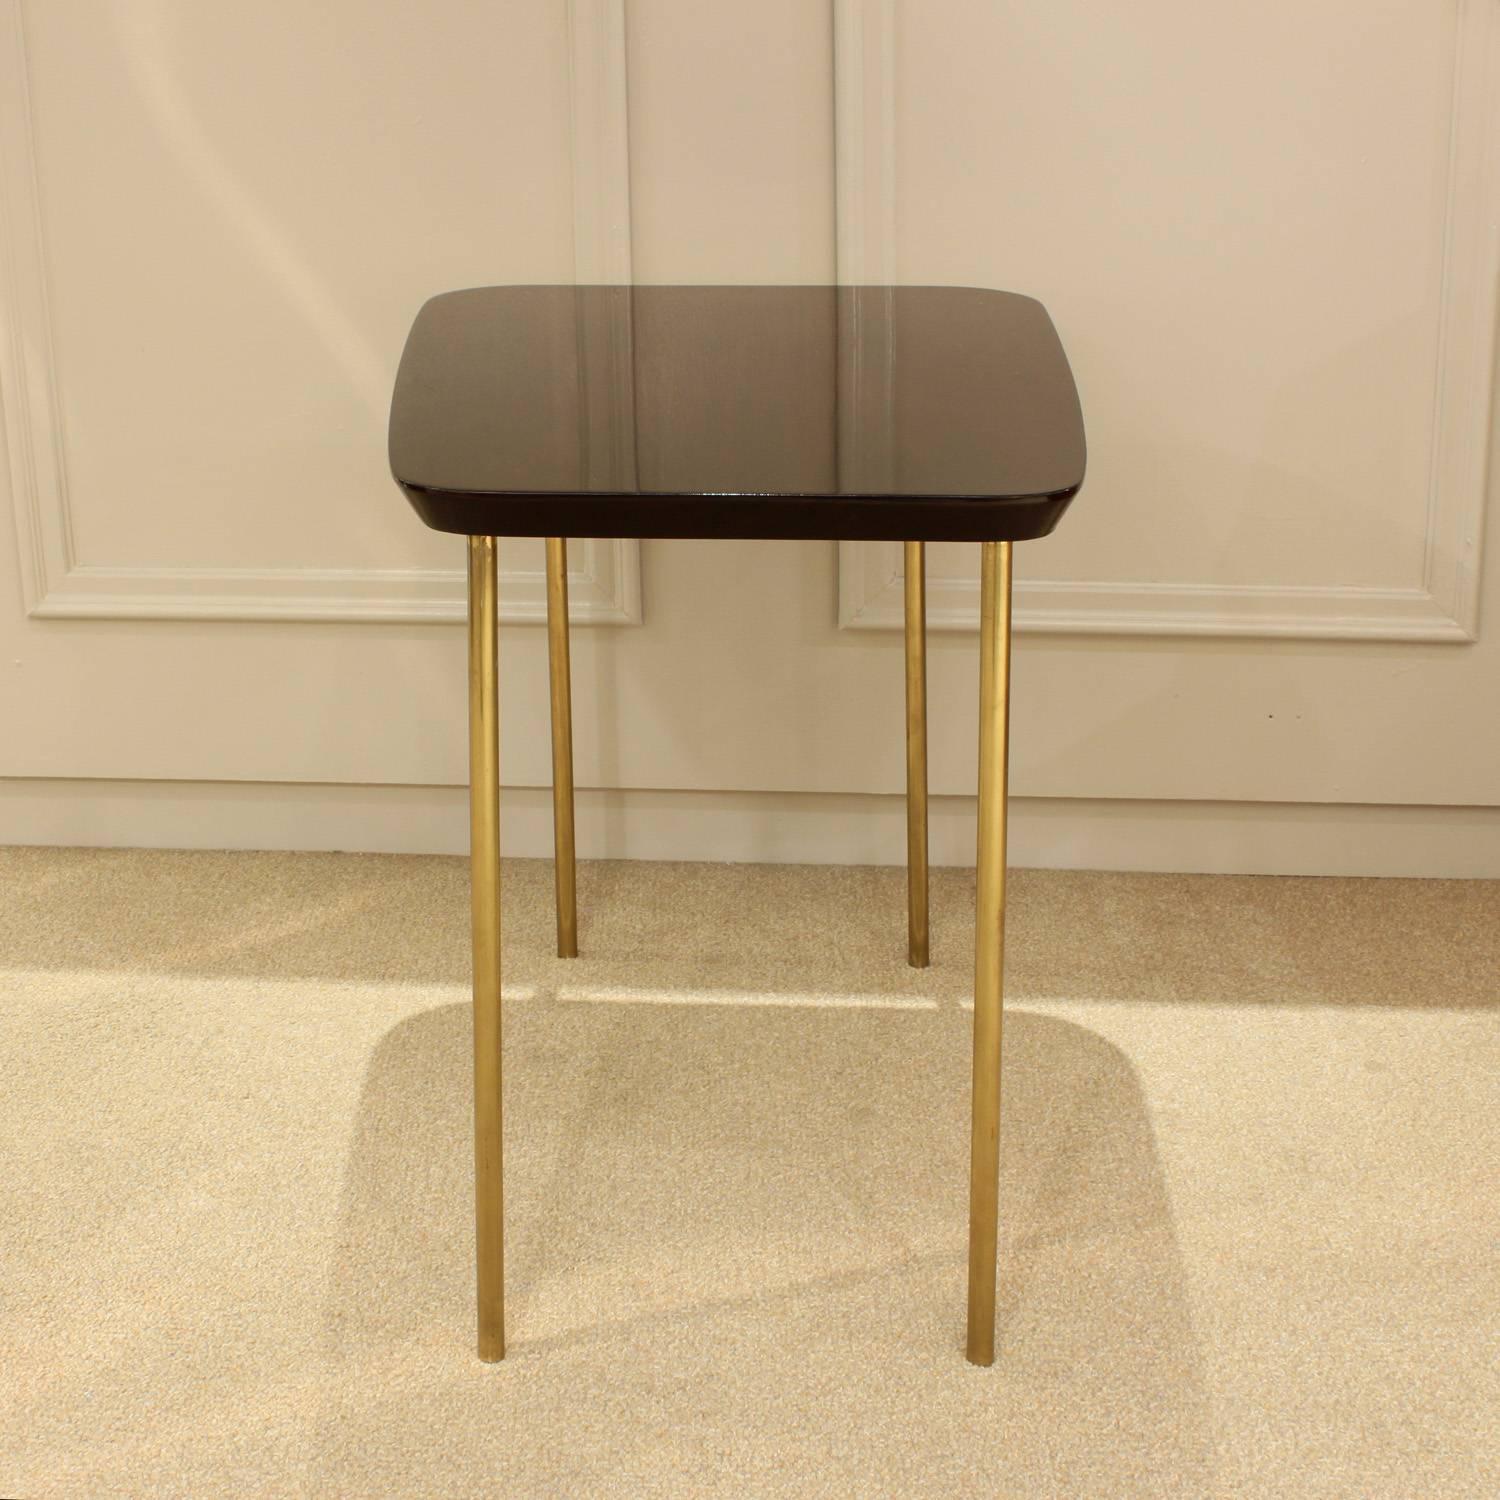 Chic end table in mahogany with brass legs by Charak Modern, American 1940s.